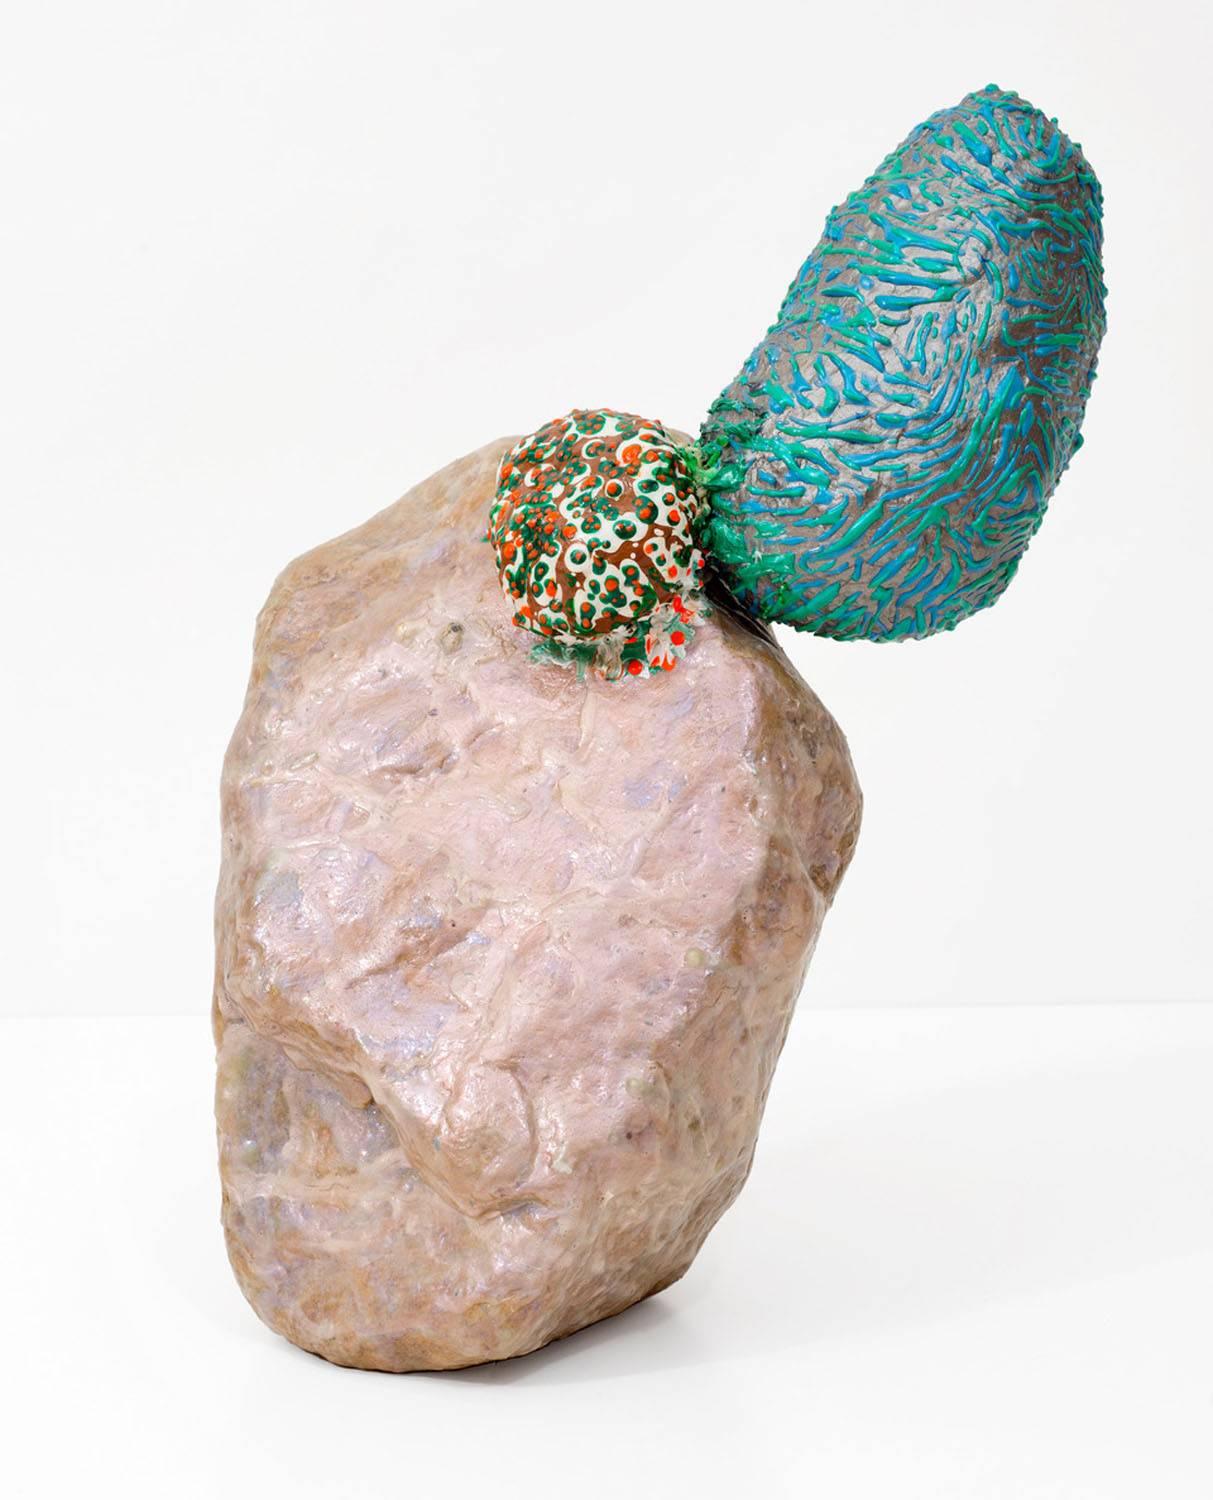 Elizabeth Knowles Abstract Sculpture - “The Other Three”, red, and turquoise texture on an opalescent background